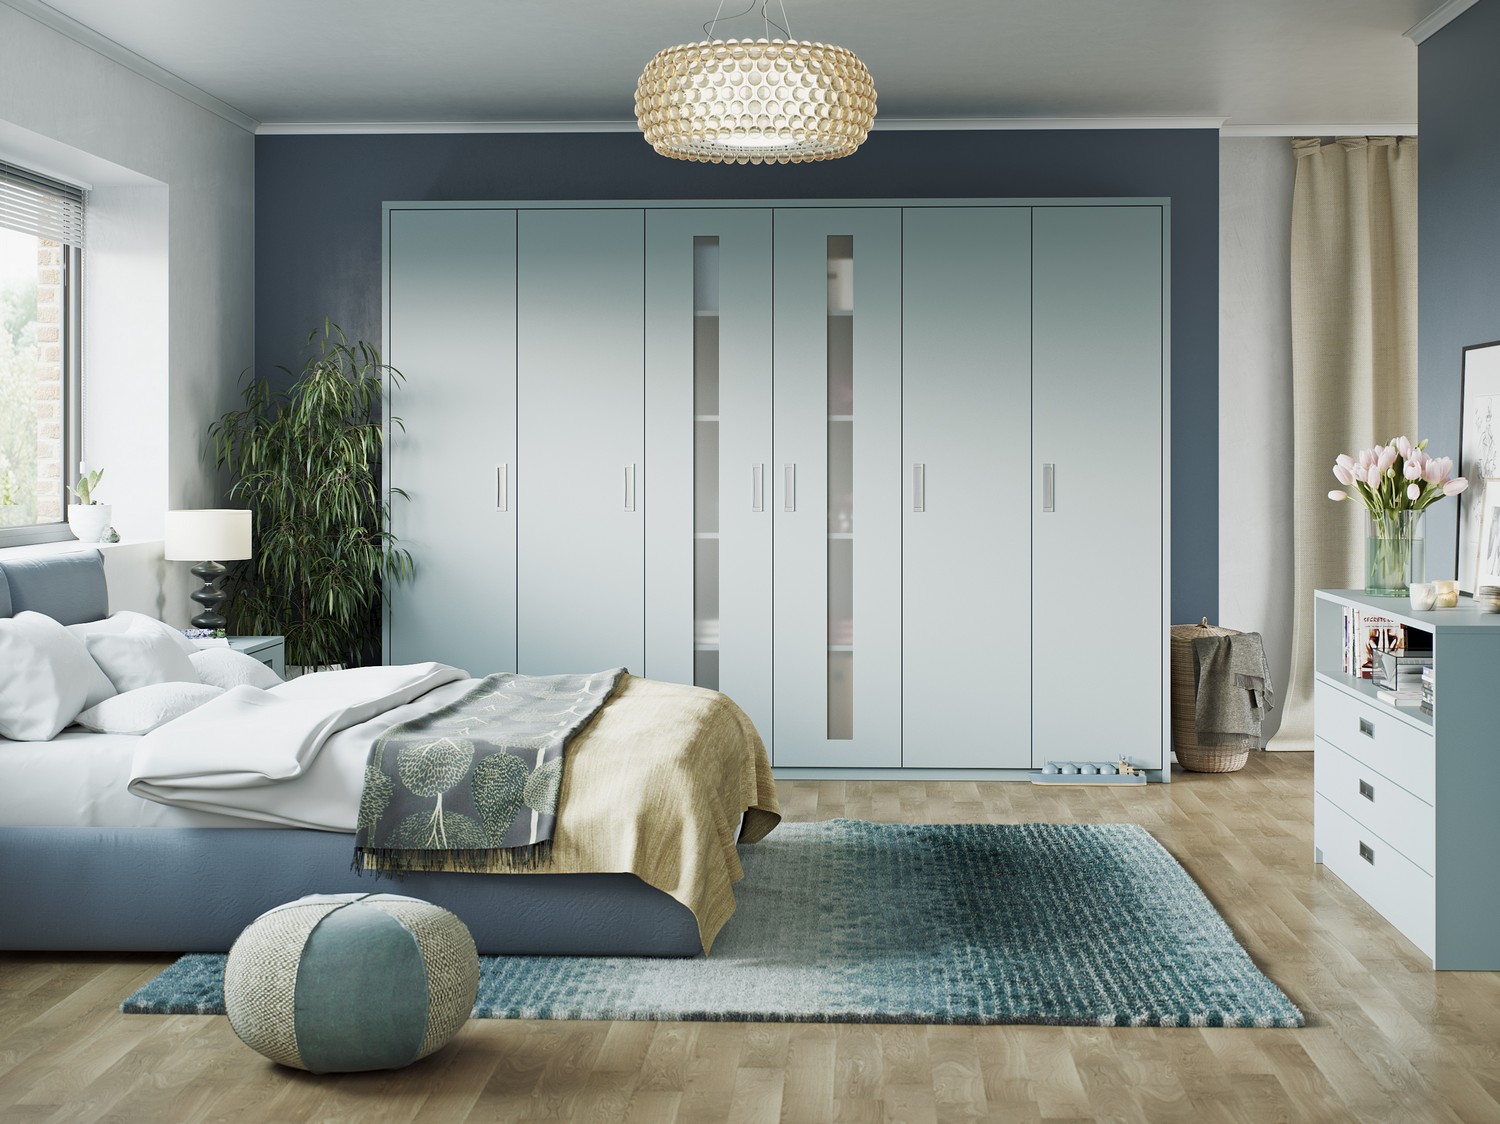 Matt powder blue fitted bedrooms Liverpool with integrated handle and frosted glass feature doors. This bedroom features a matching chest of drawers and has been designed for our client in Kirkby.